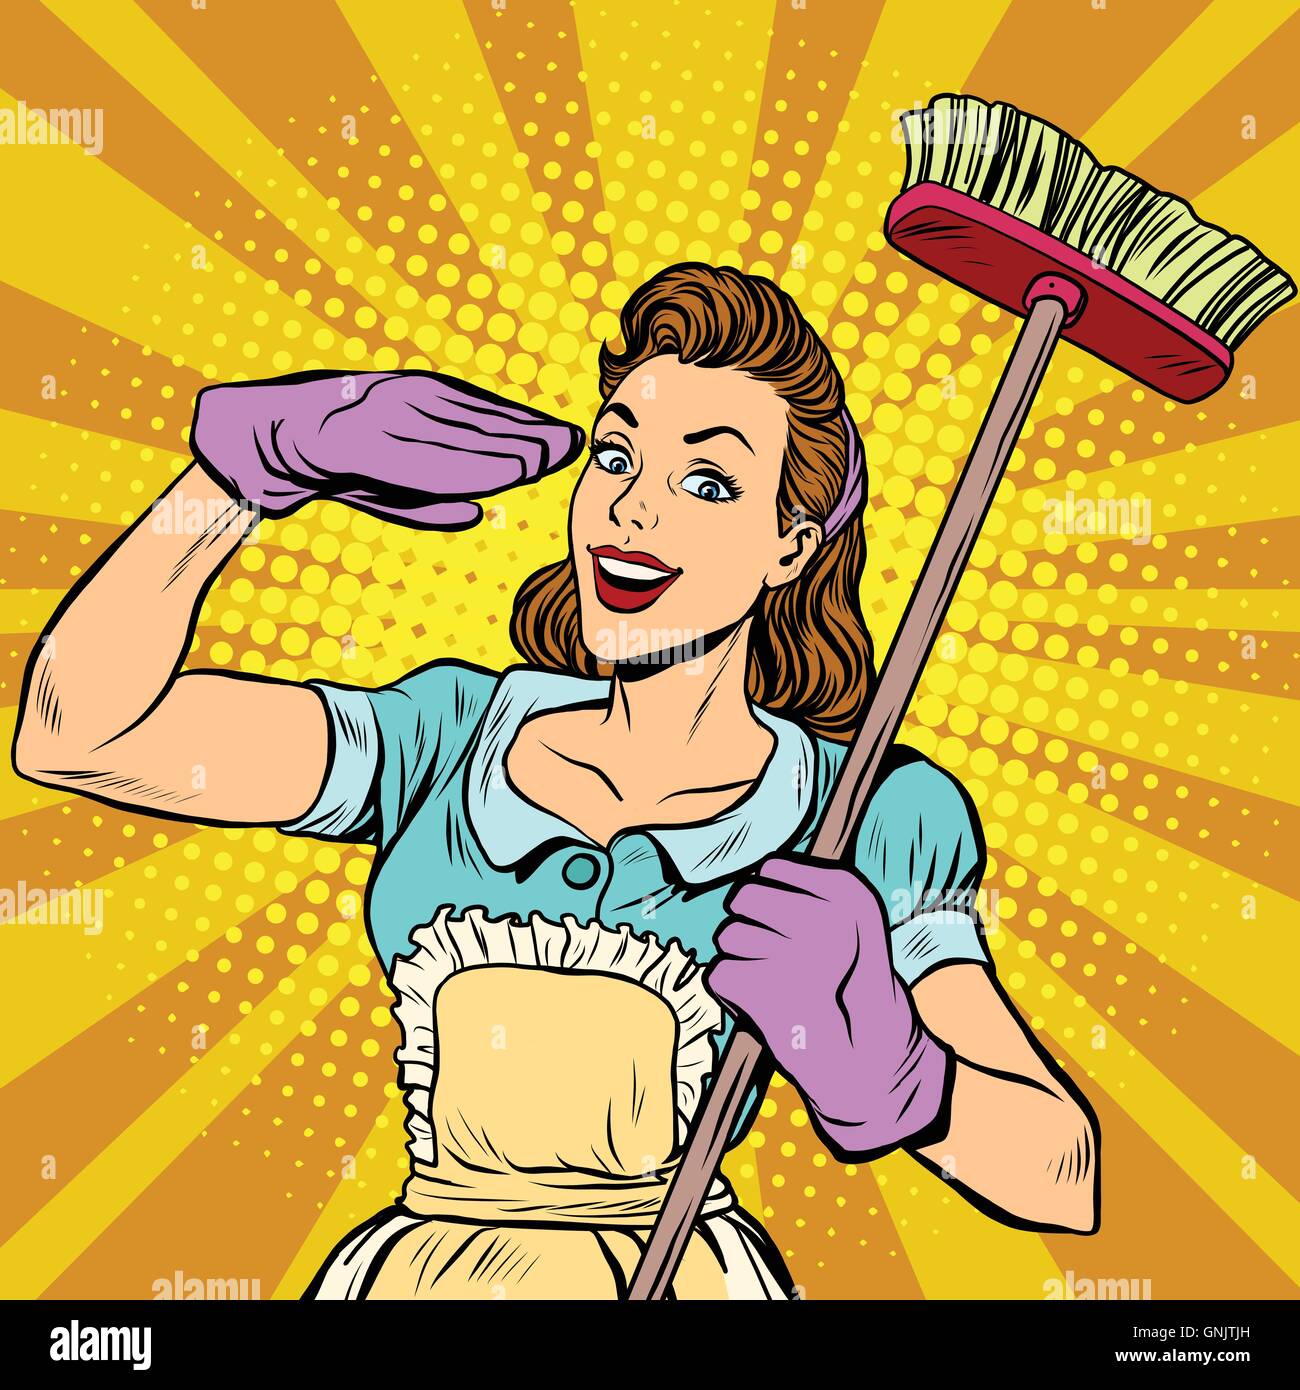 Female cleaner cleaning company pop art retro Stock Vector